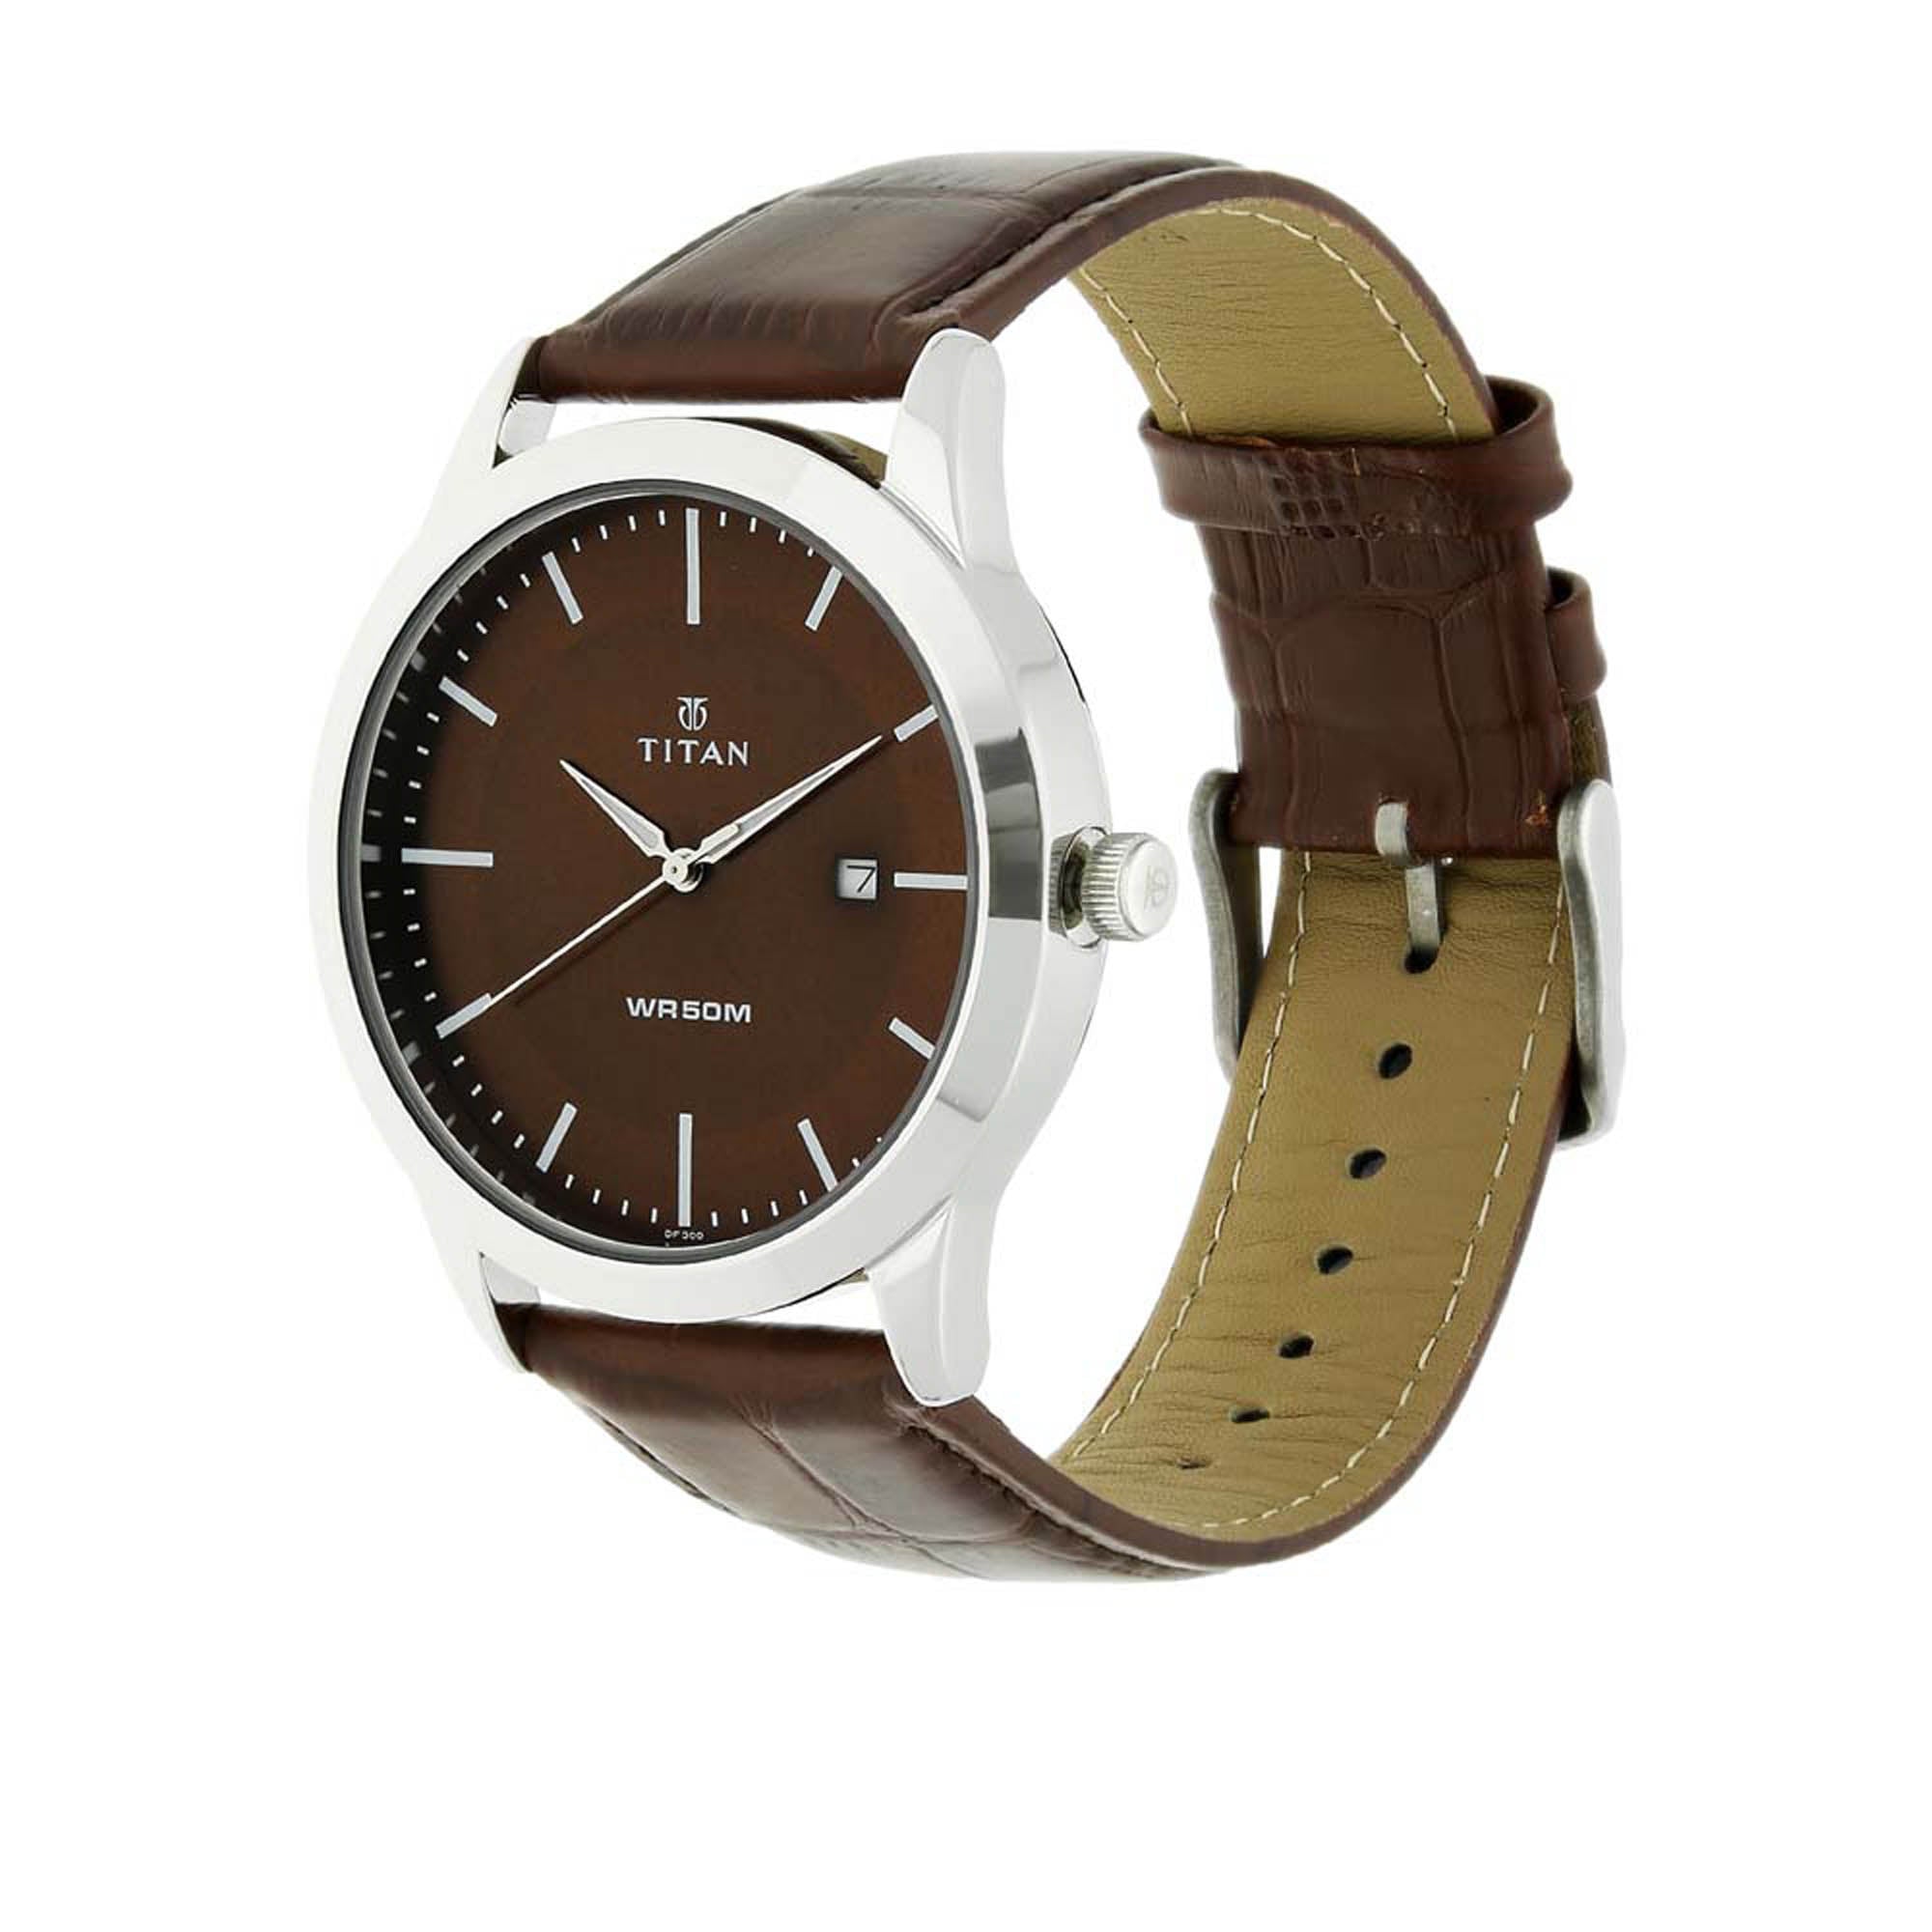 Titan Quartz Analog with Date Brown Dial Leather Strap Watch for Men